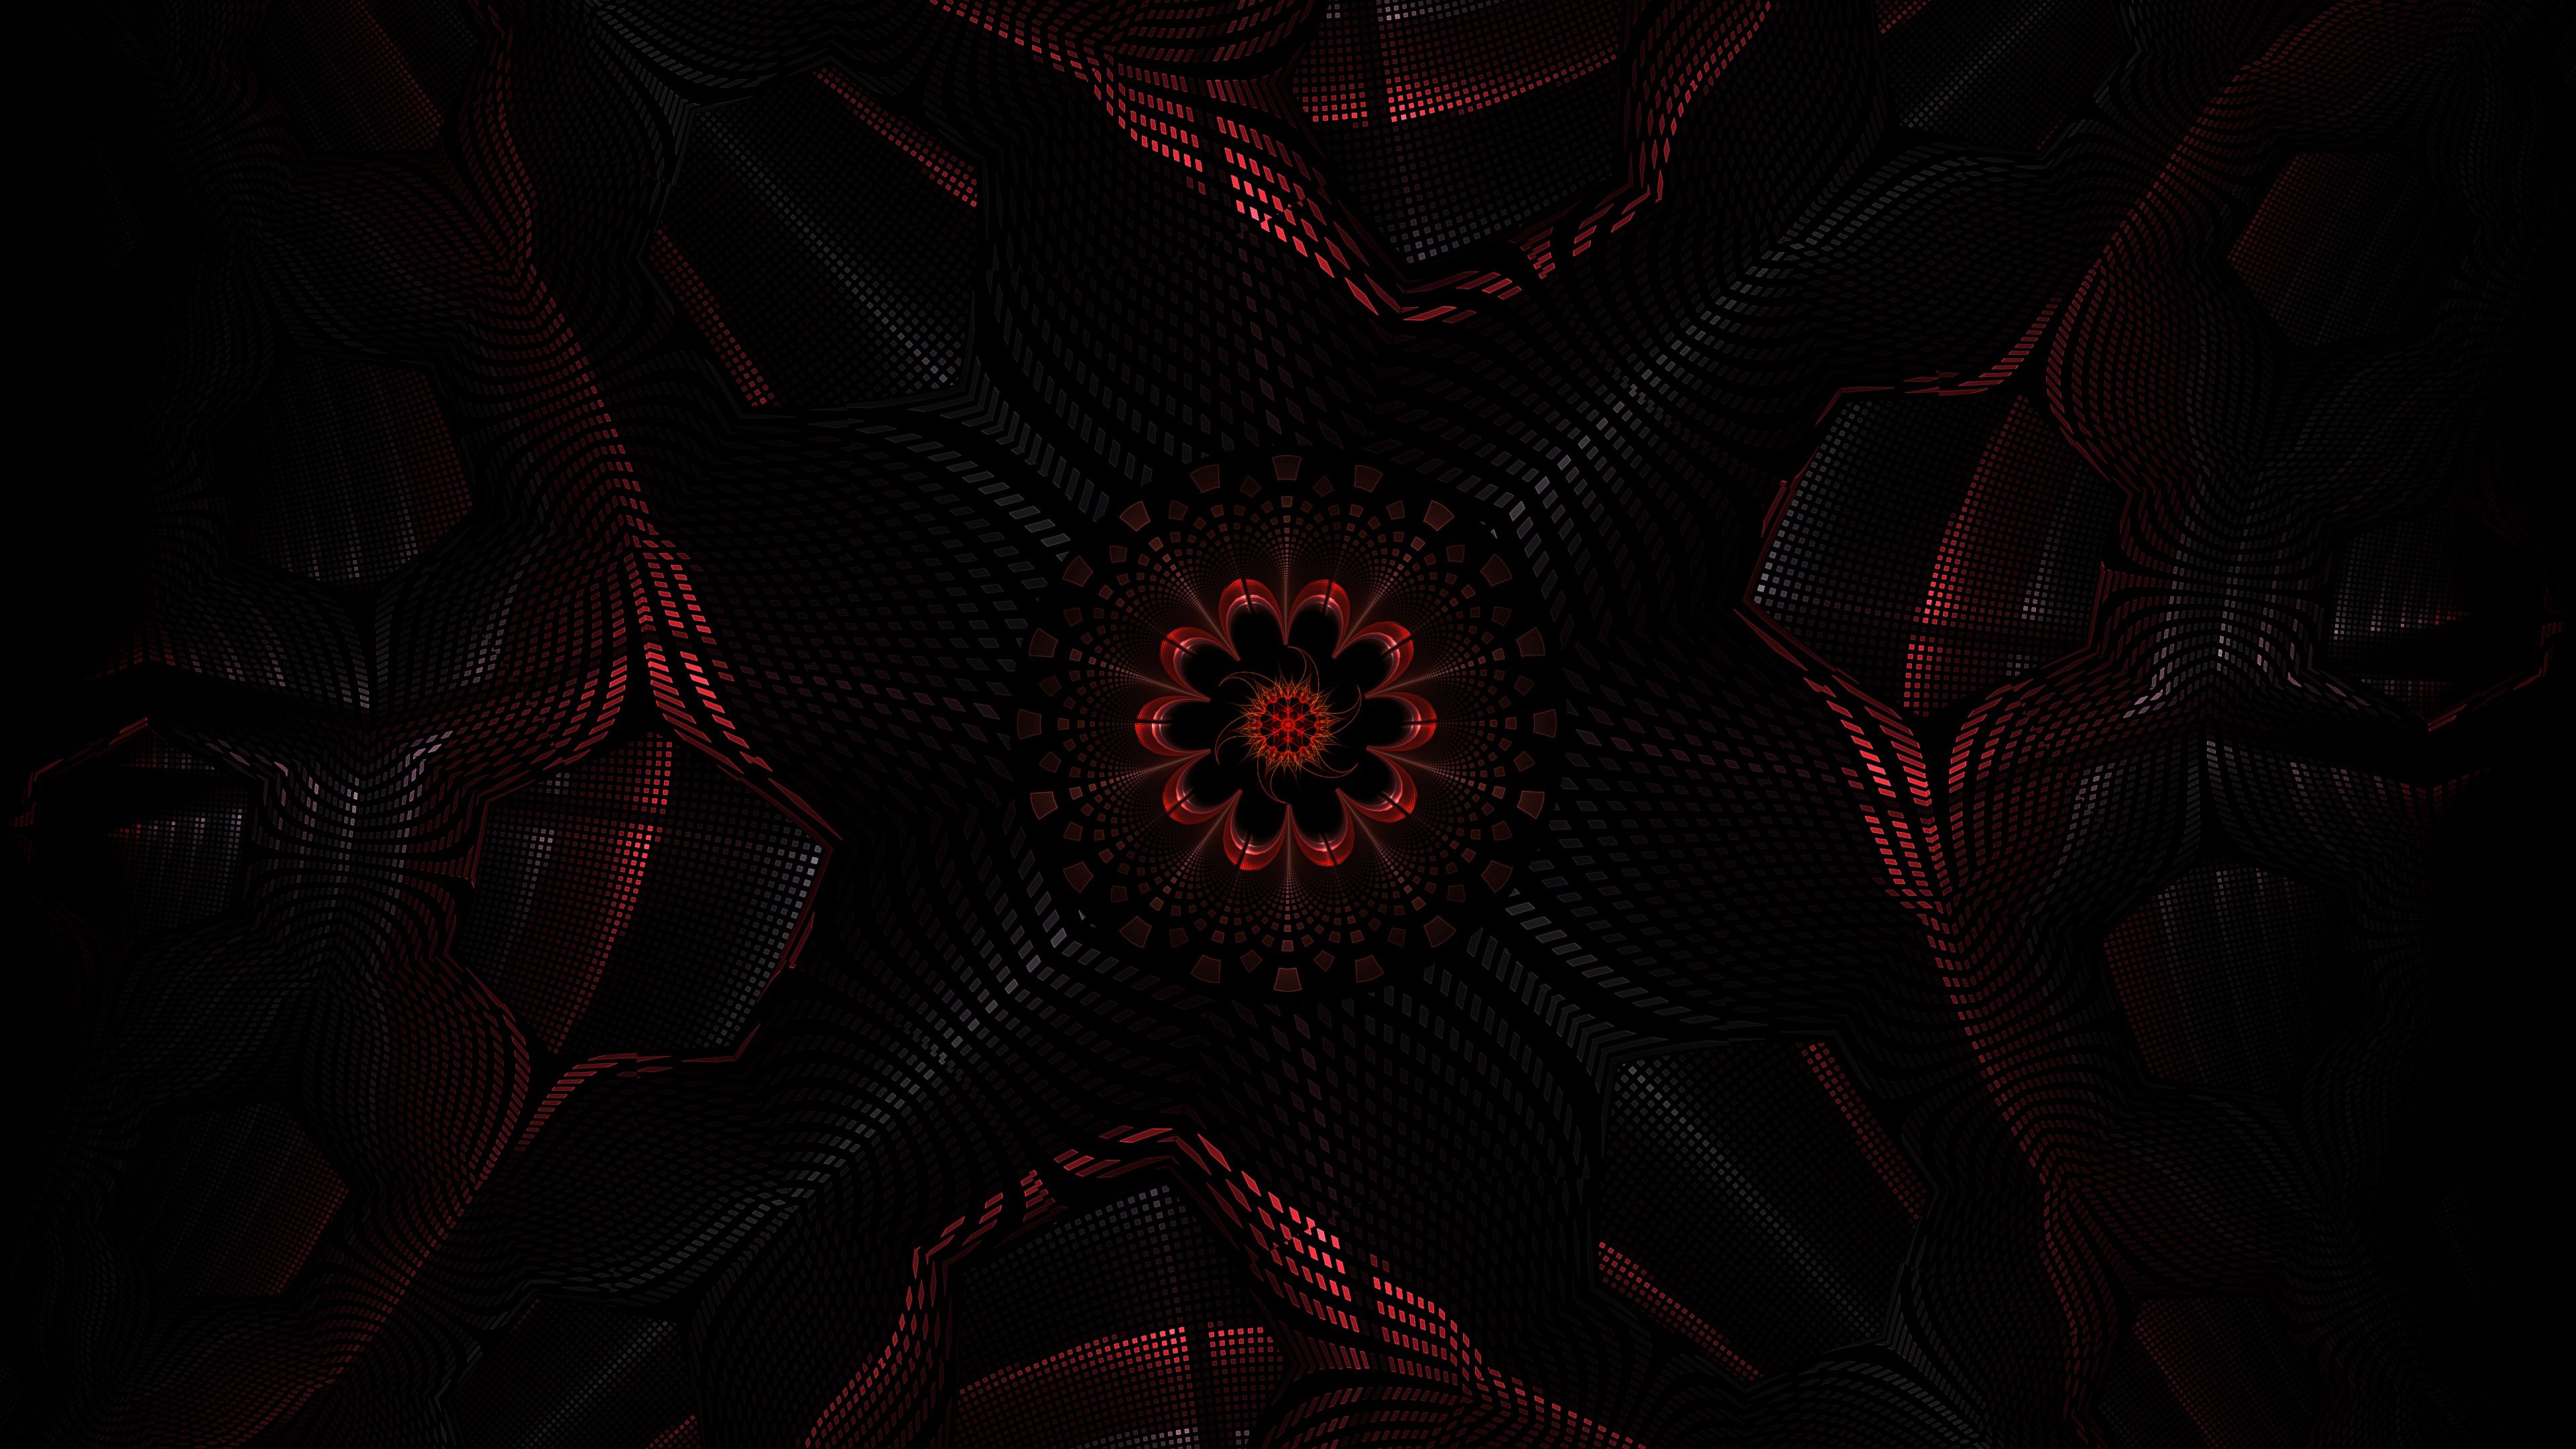 fractal, abstract, black, dark, red High Definition image